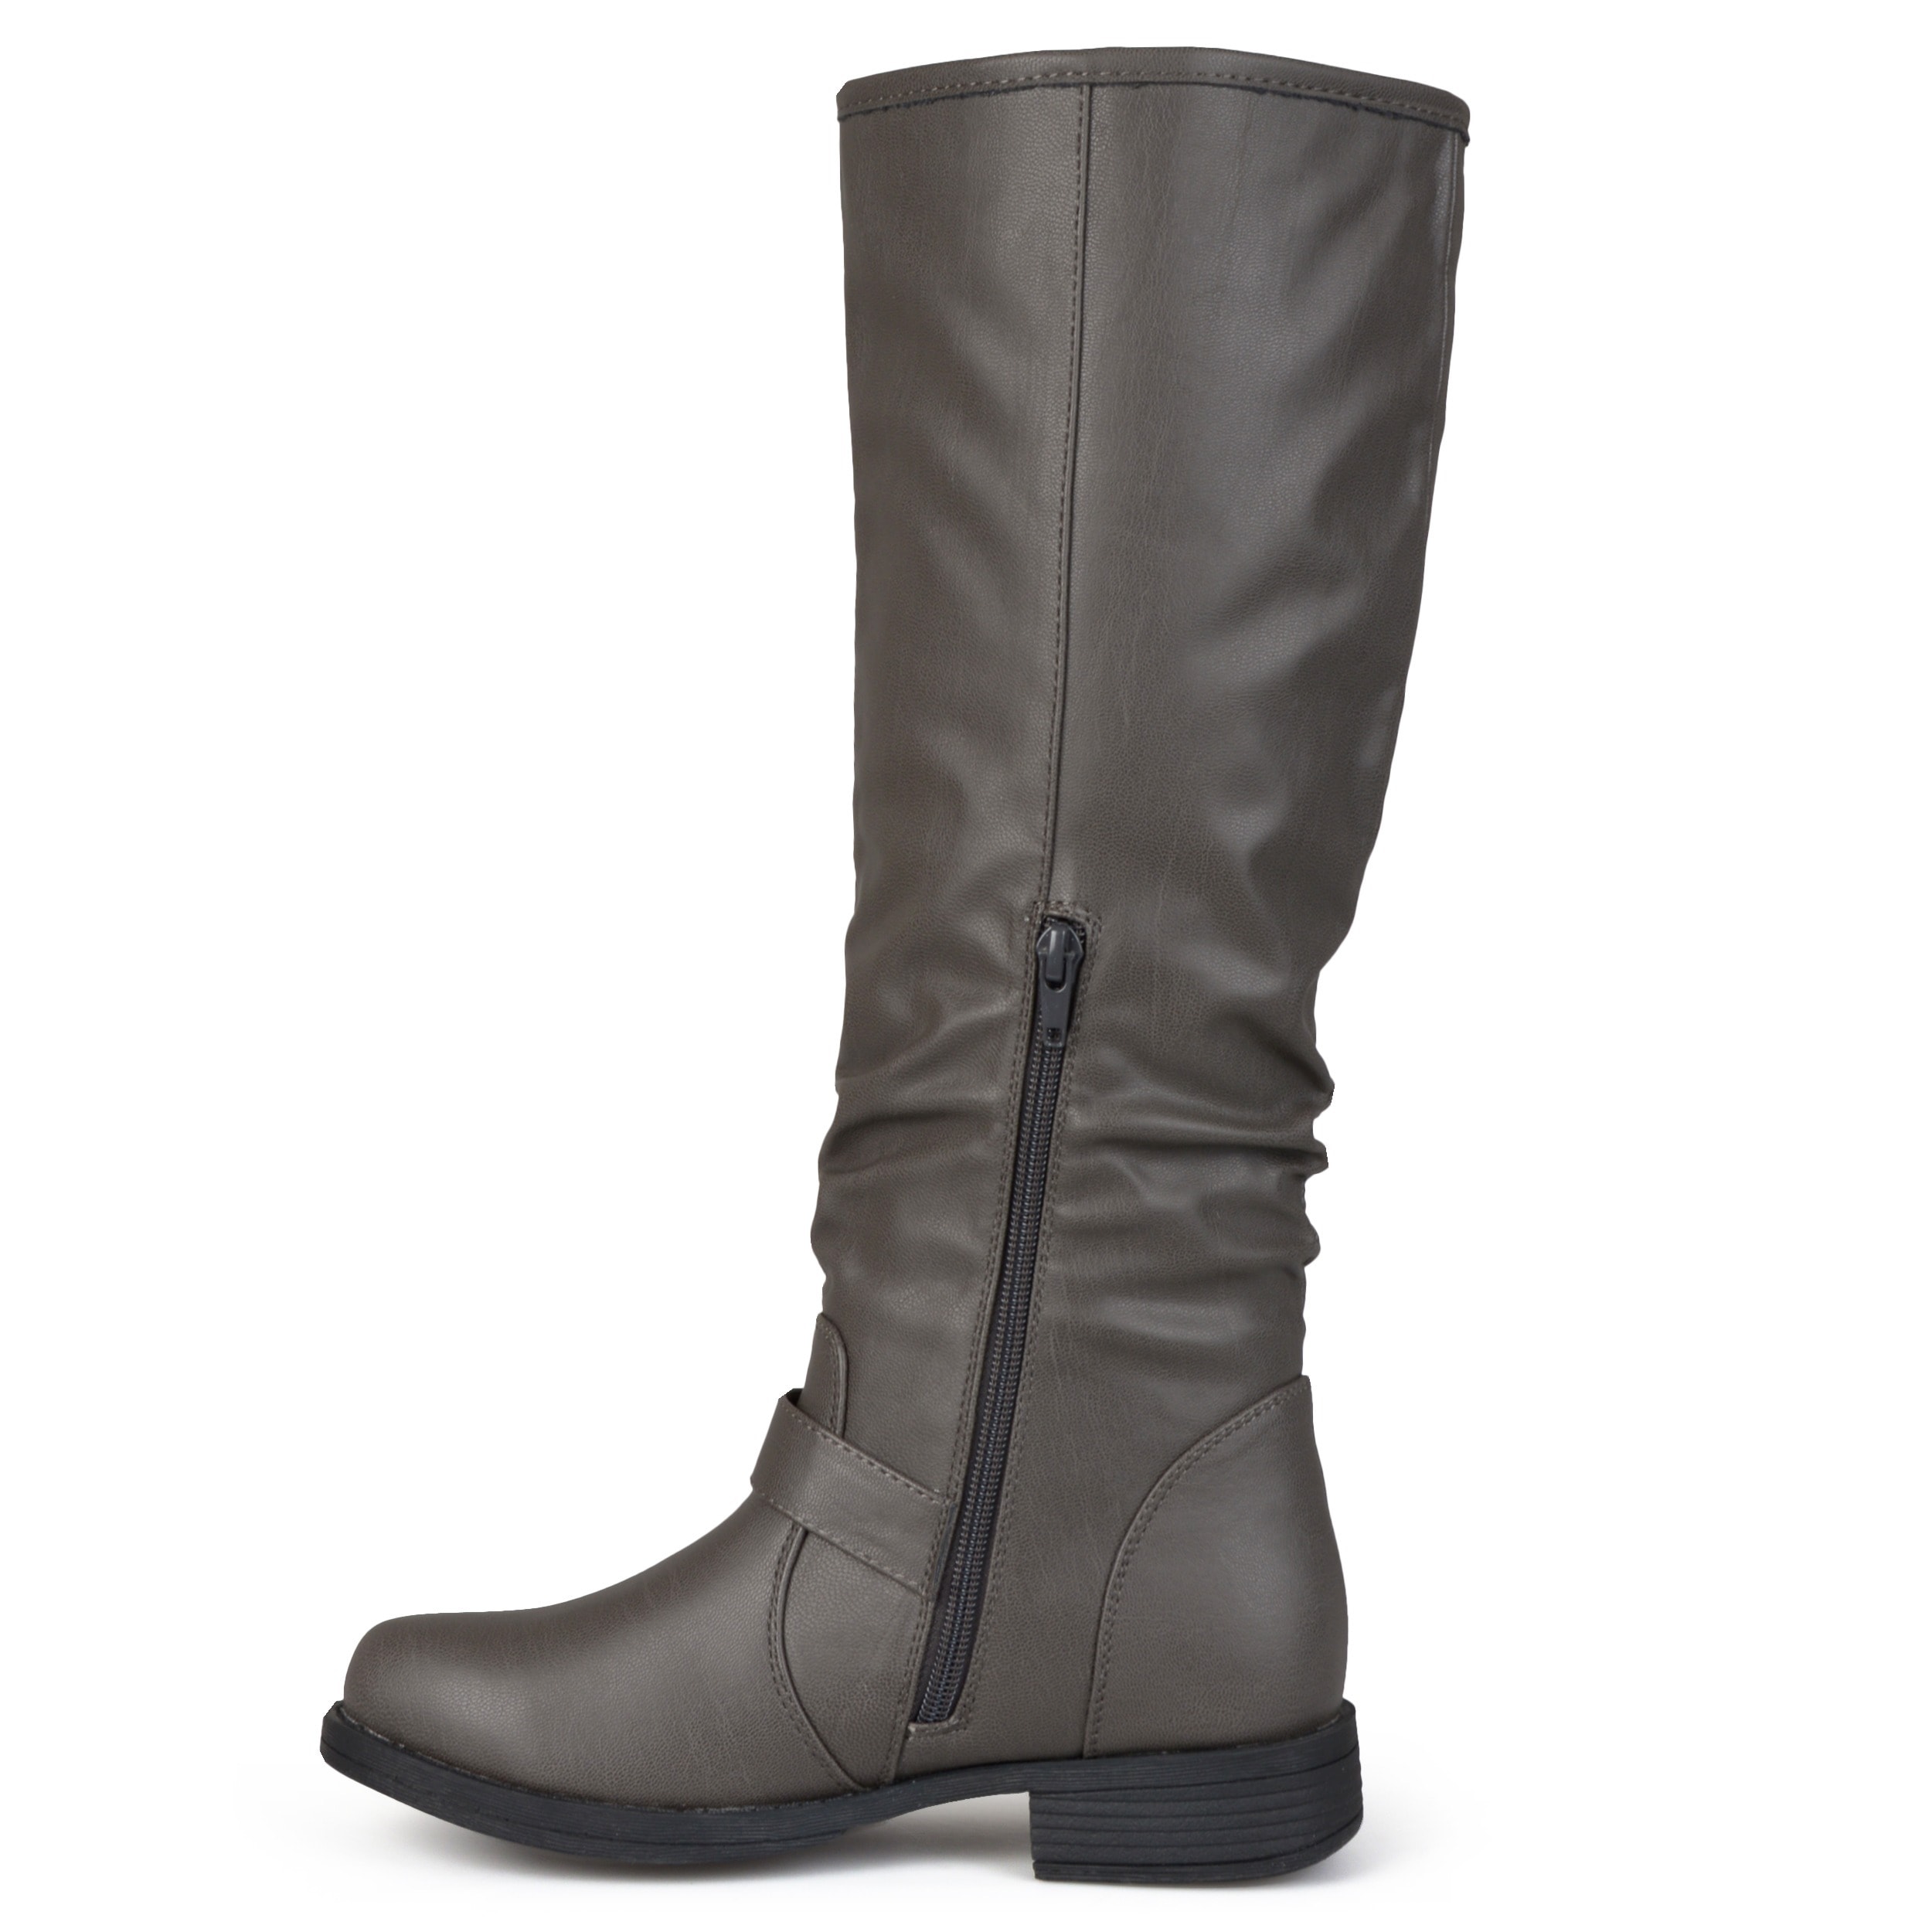 wide calf two tone riding boots